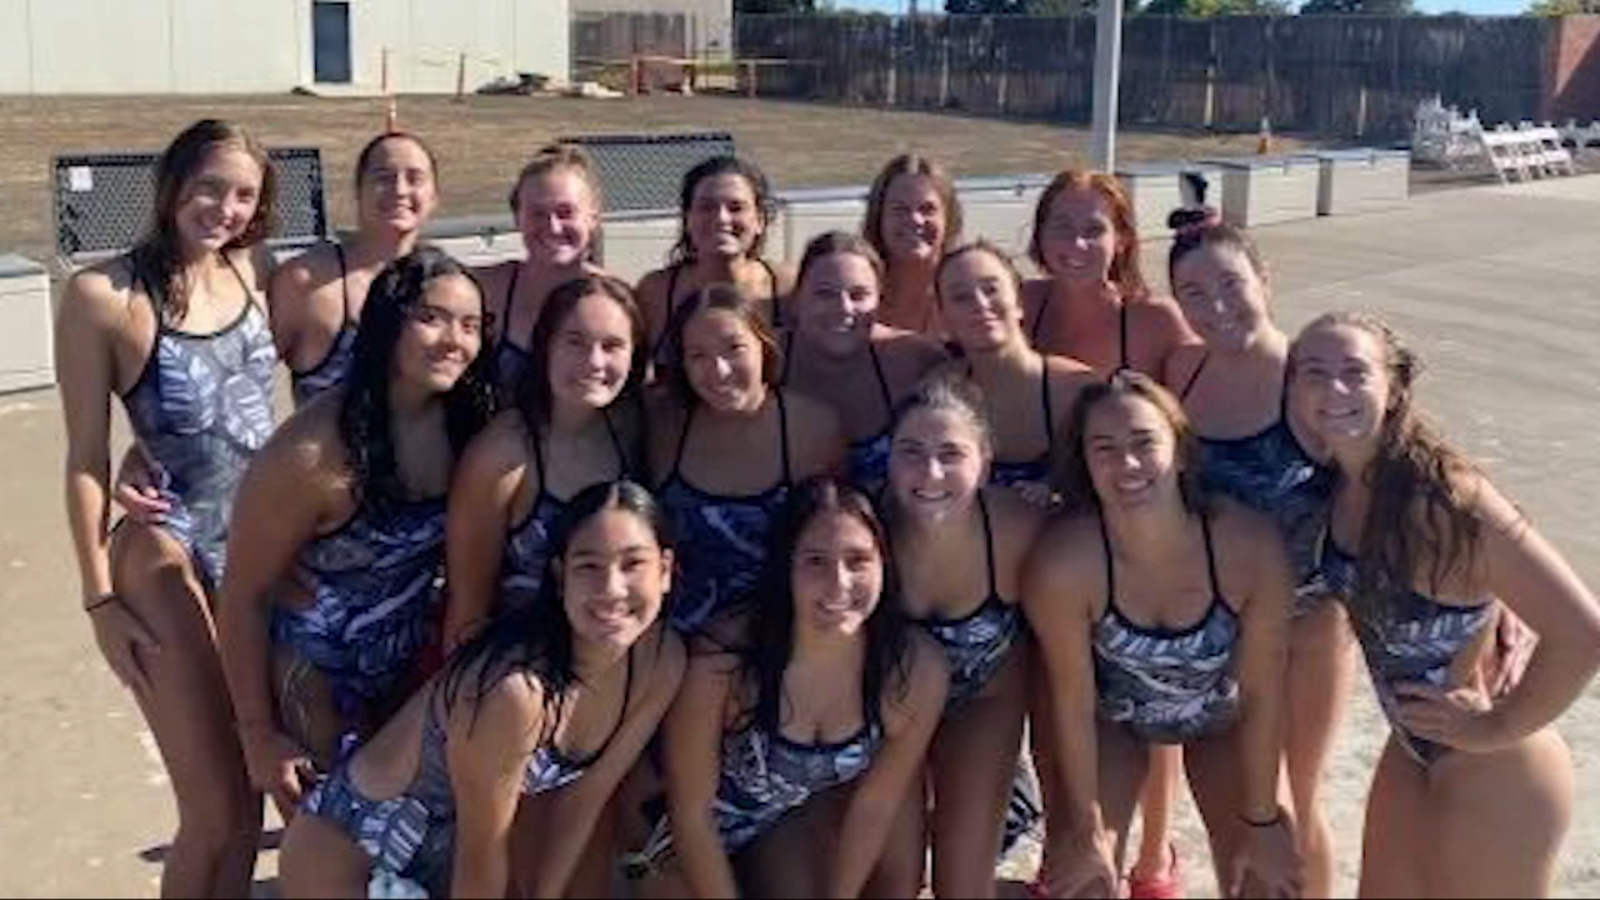 Players, coaches shocked and disappointed as CSU East Bay discontinues women’s water polo team [Video]